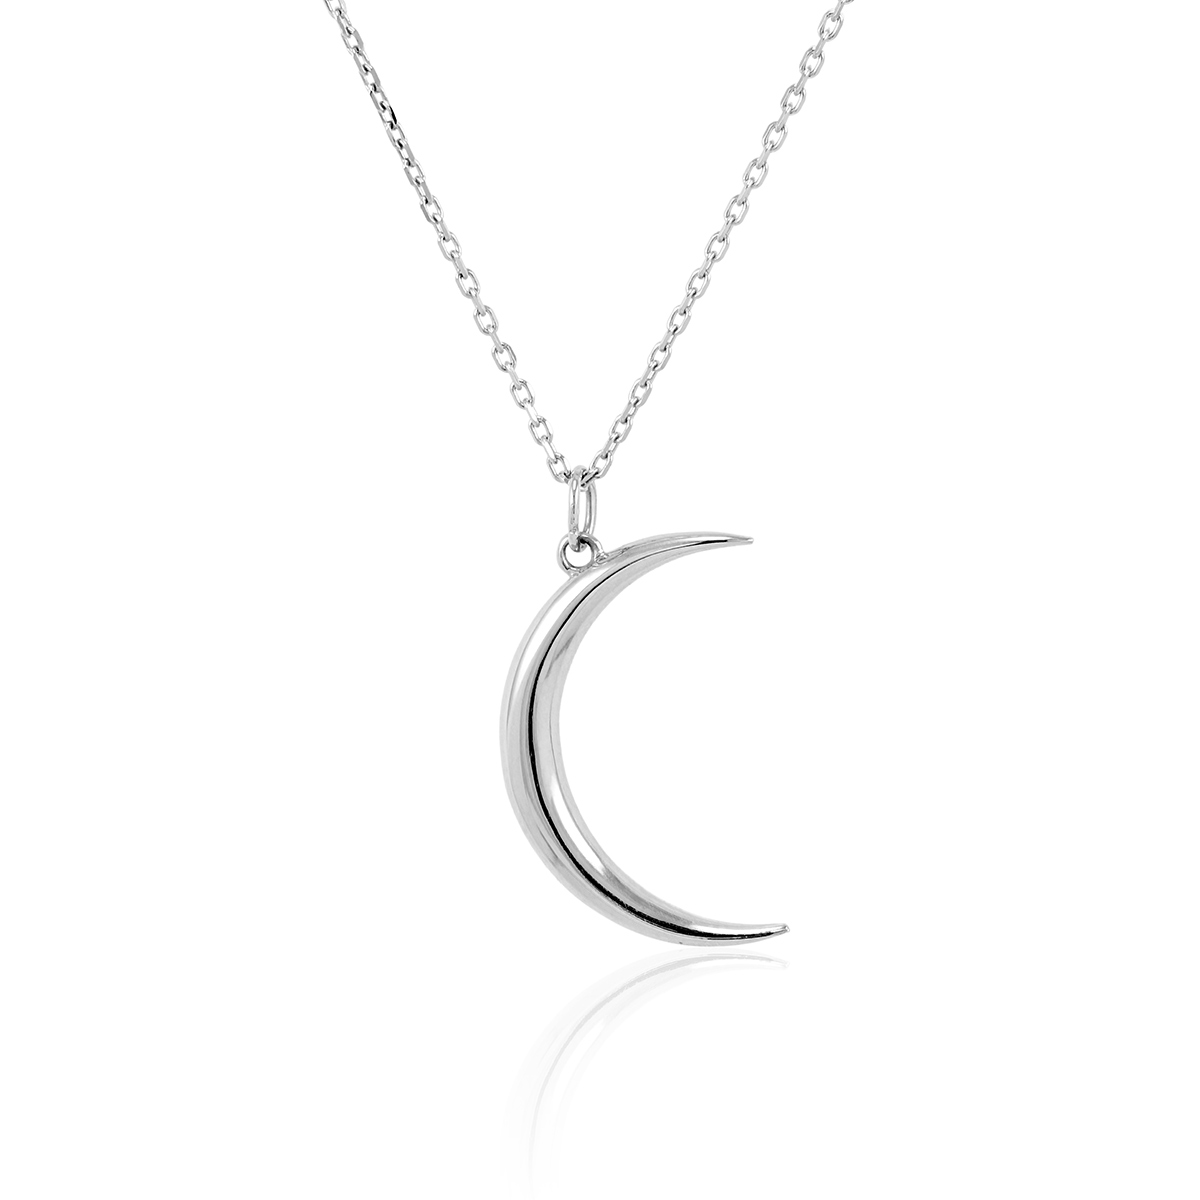 Moon necklace | Zmay Jewelry